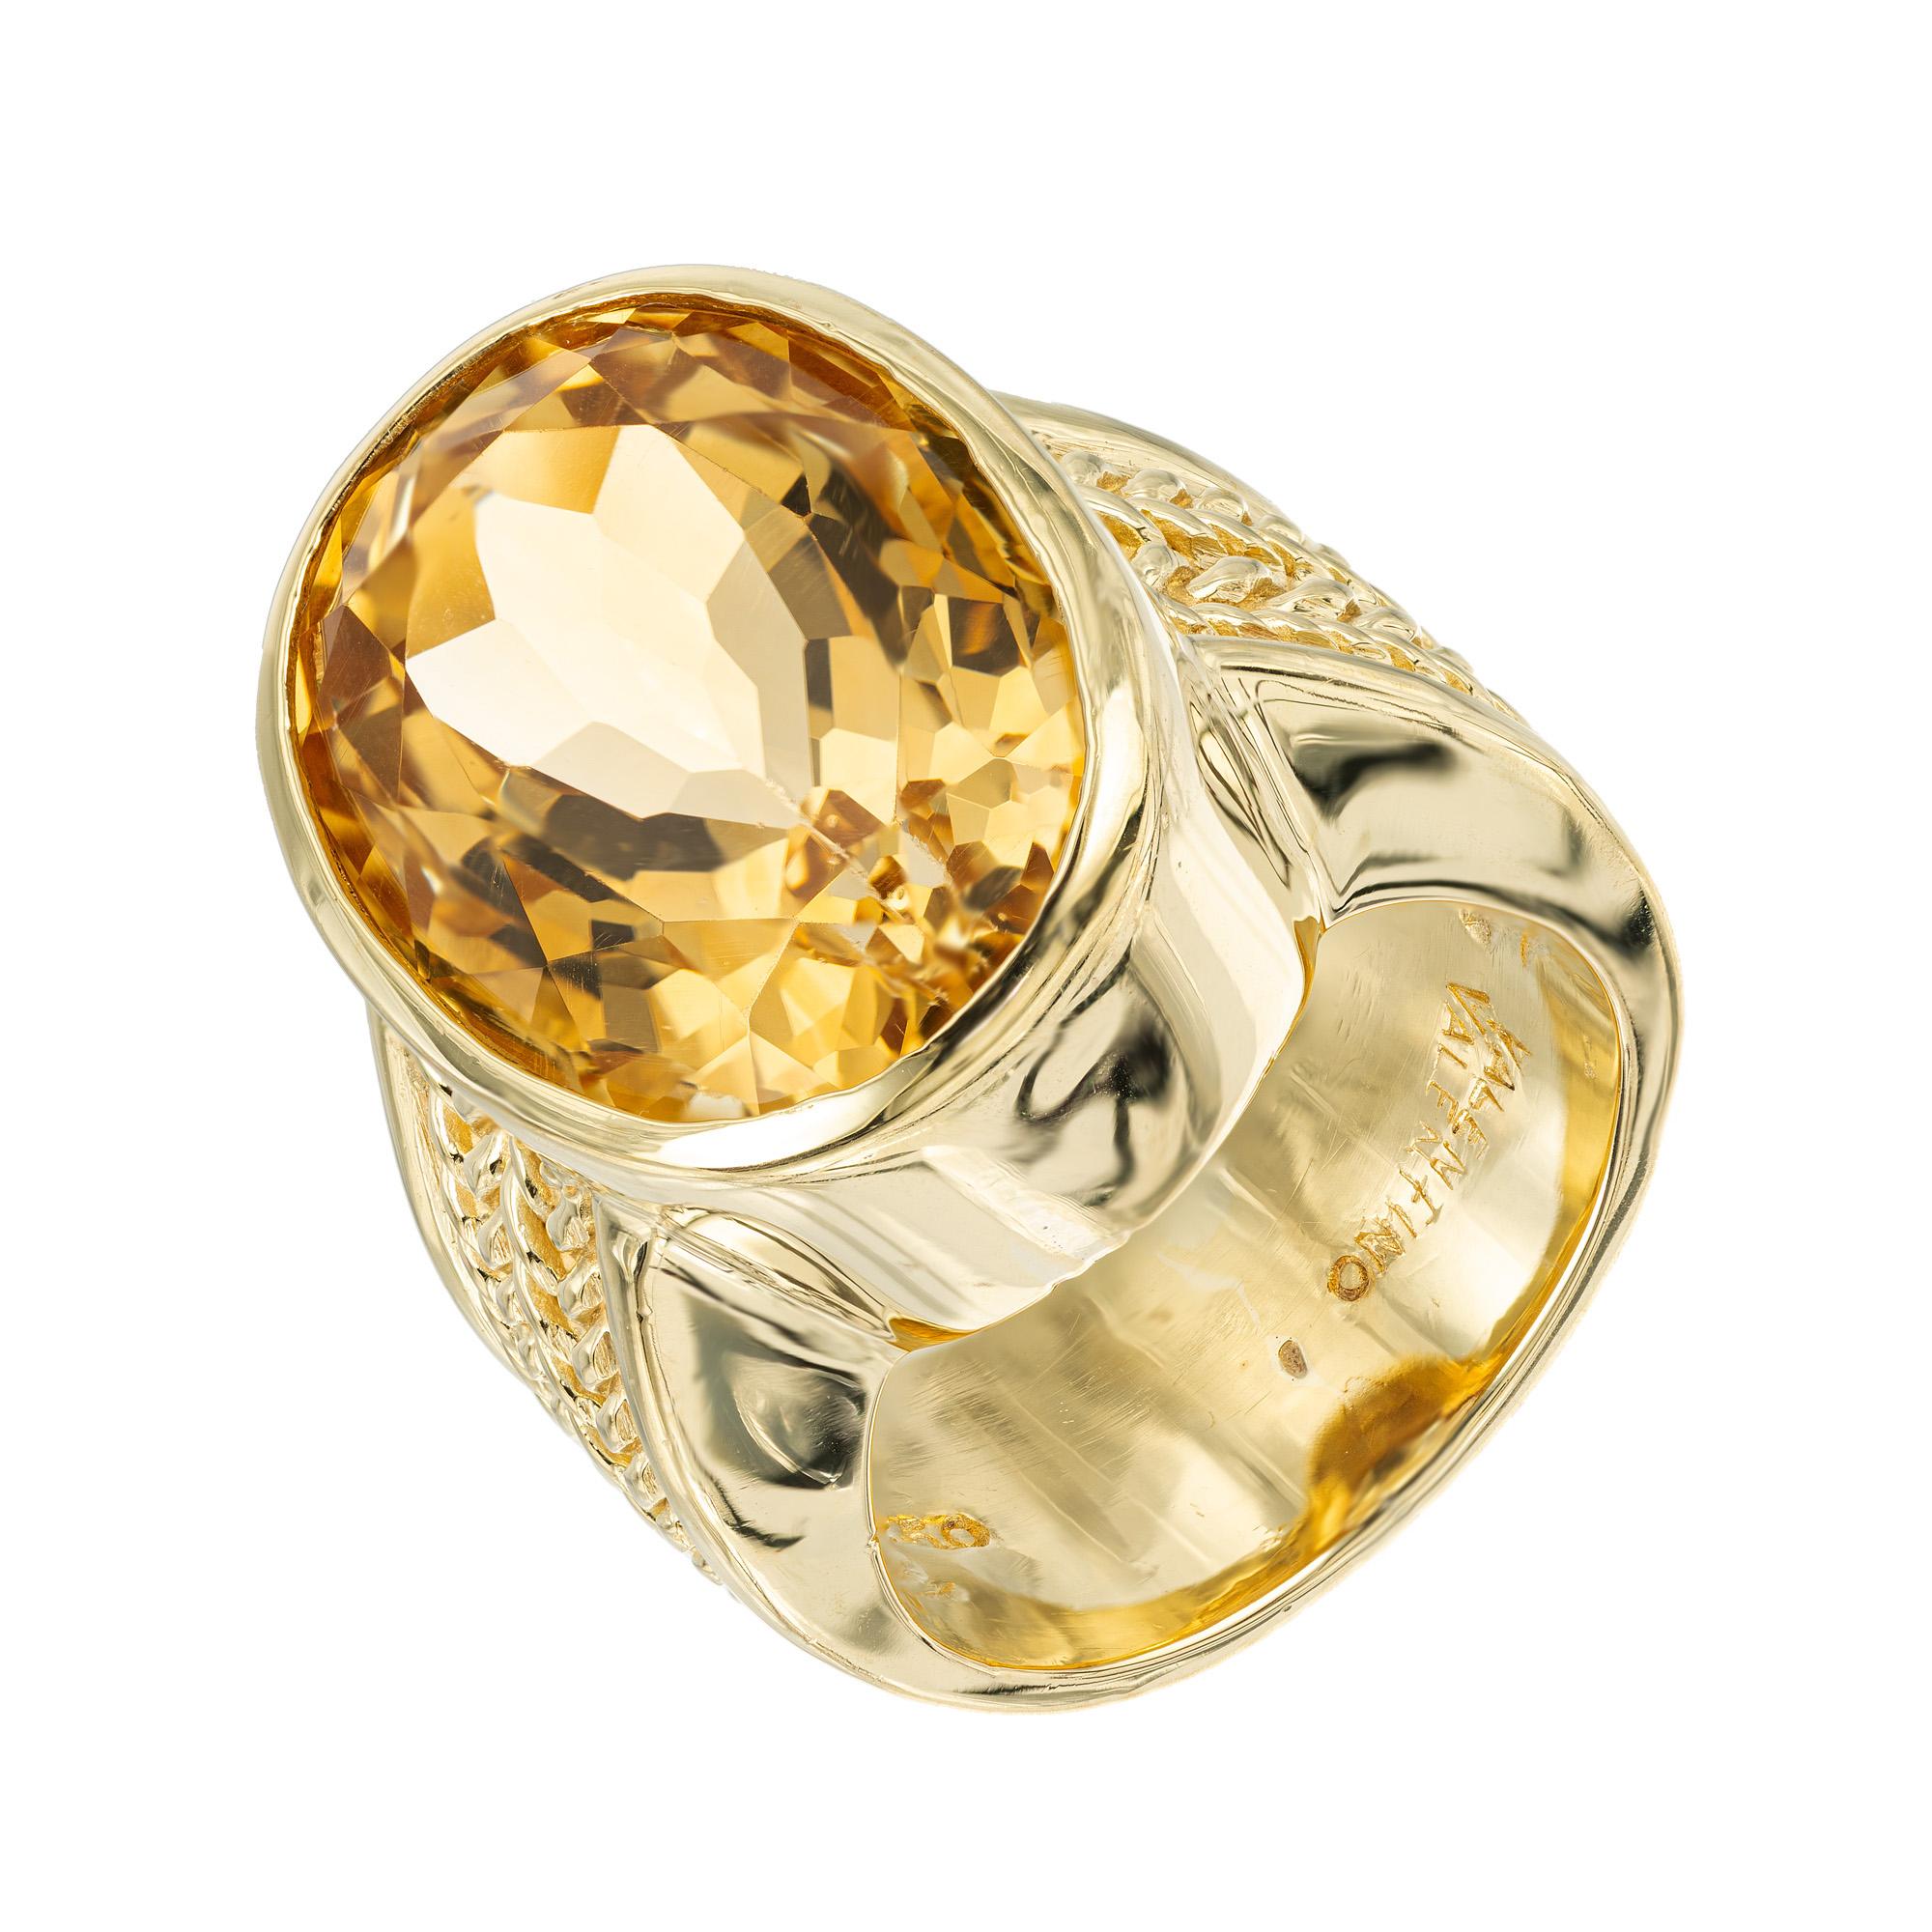 Vintage 1970's Valentino oval Citrine Yellow Gold cocktail ring. This stunning piece features a dazzling 11.00 carat oval citrine center stone, exuding a warm and inviting yellow hue. Mounted in 18k yellow gold, the setting is wide with a weave